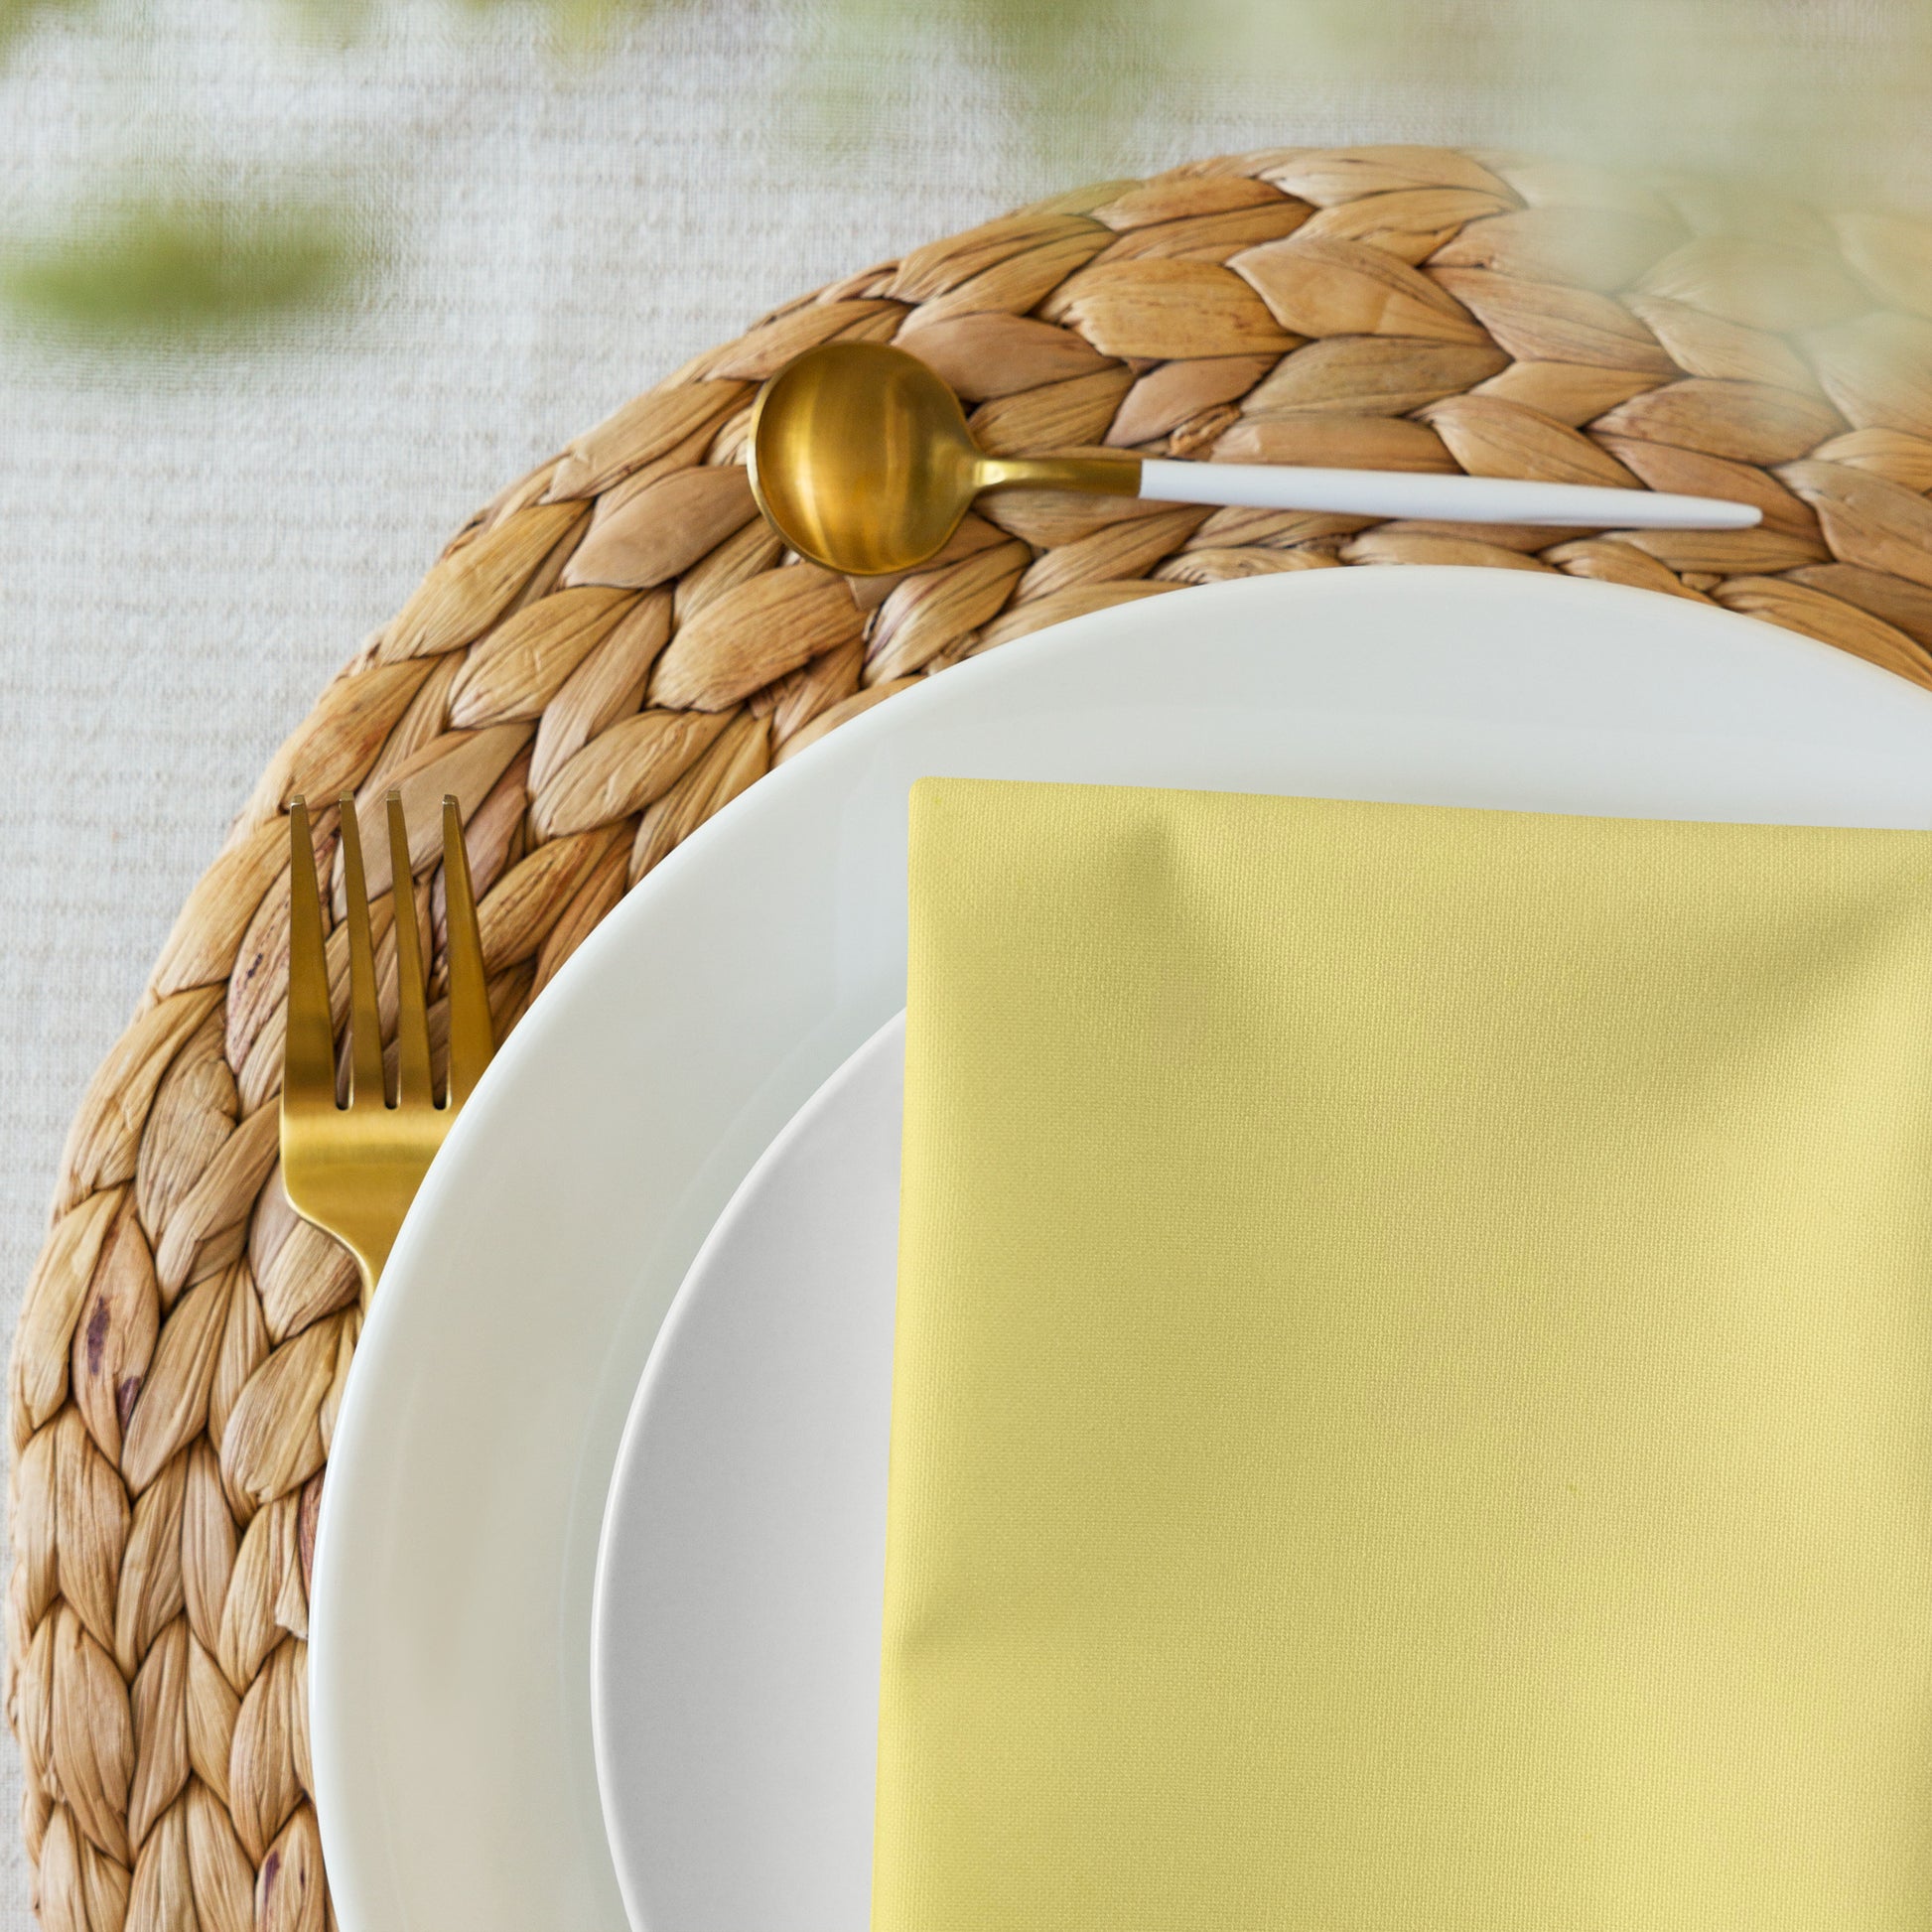 Yellow cloth napkin on dinner plates/place setting